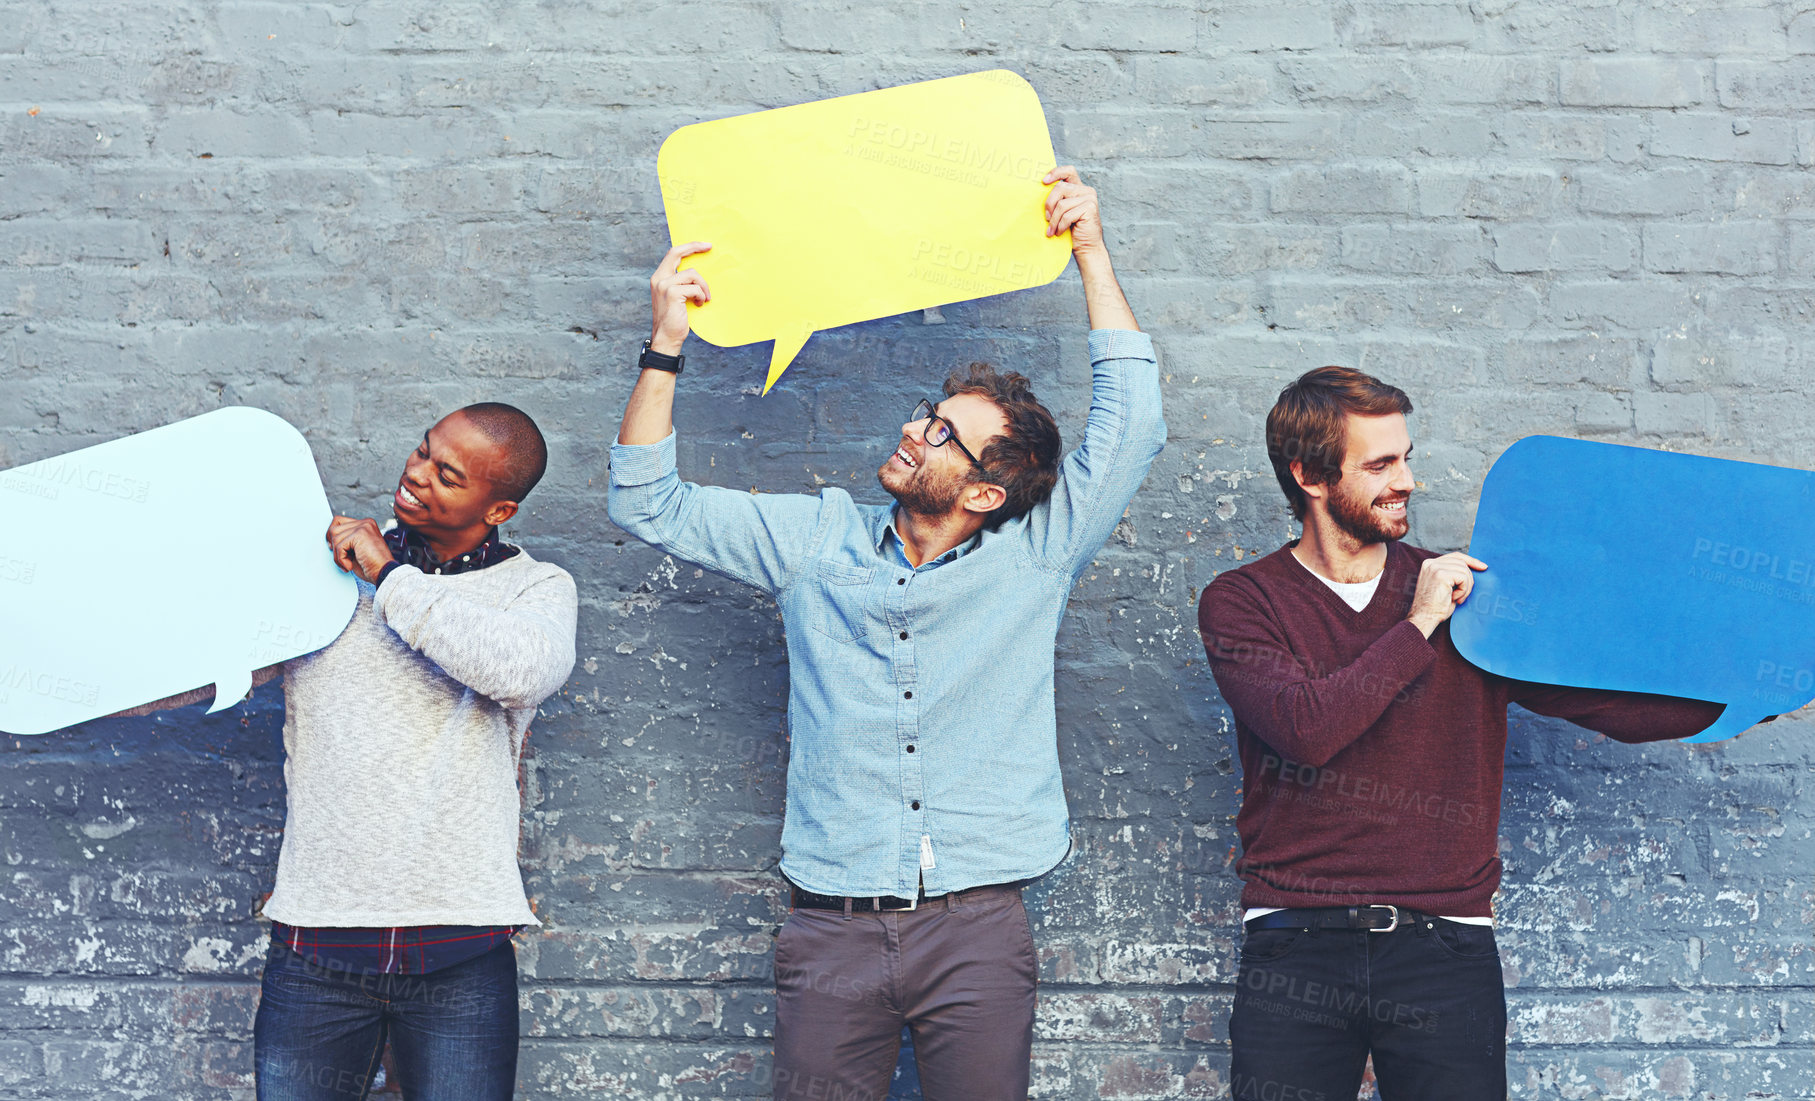 Buy stock photo Shot of a group of young men holding speech bubbles against a brick wall